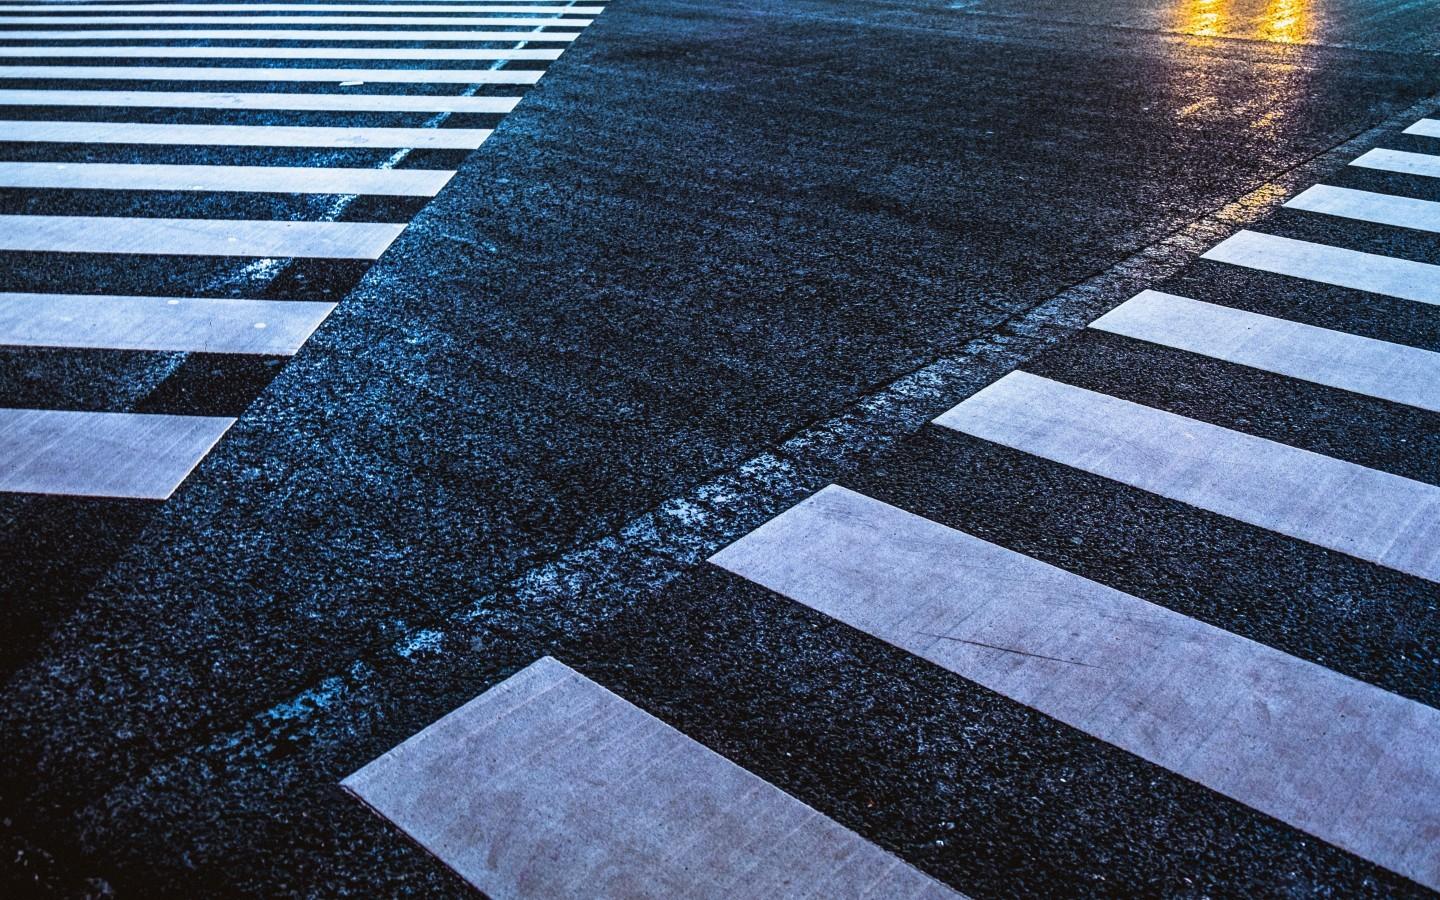 Download 1440x900 Crossing Road, Reflection, Pedestrian